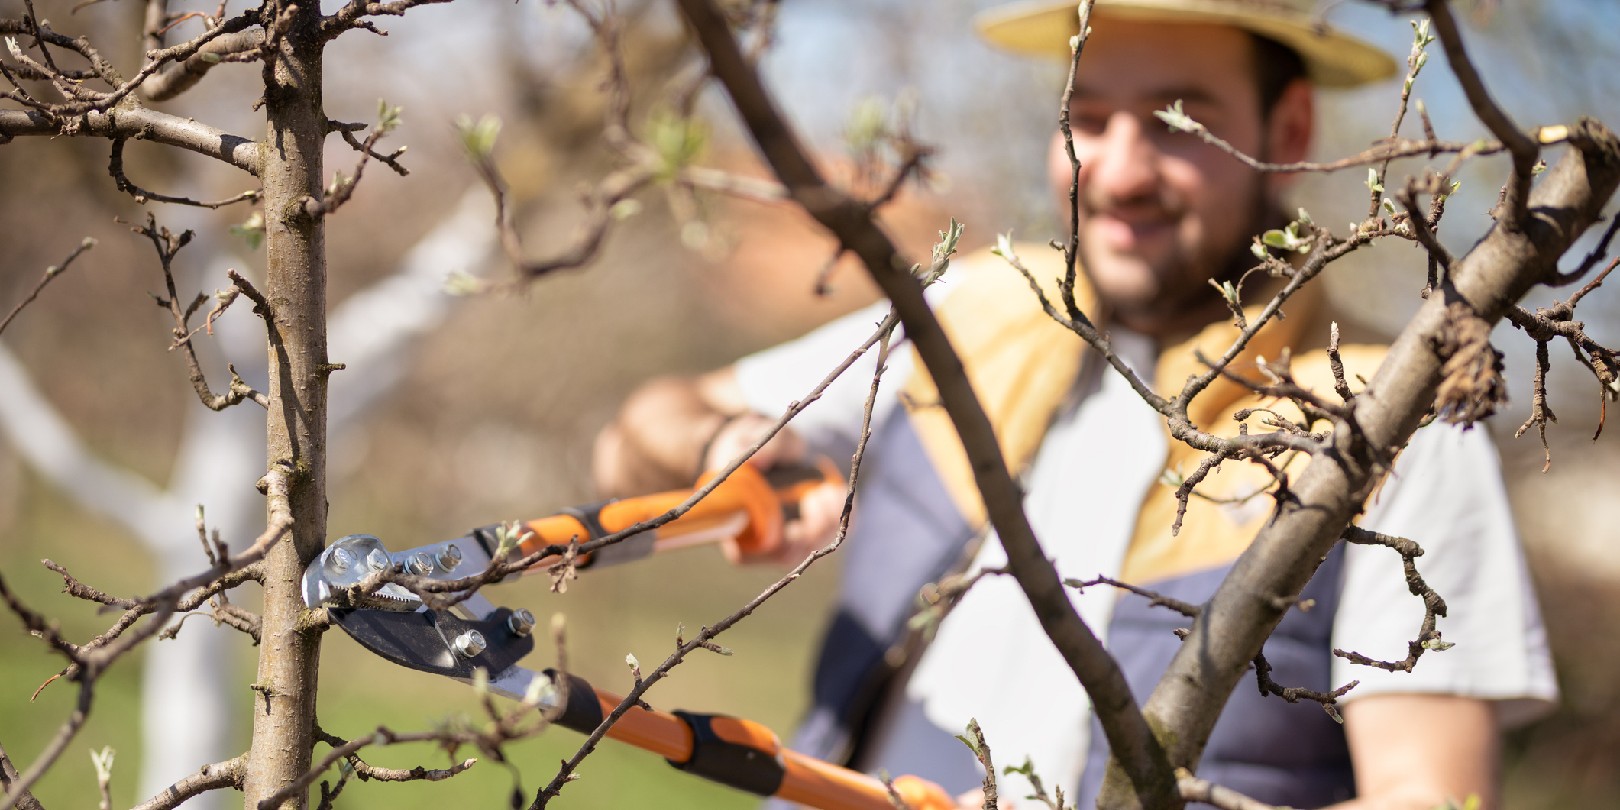 Winter, Spring, Summer, Fall: When’s the Best Time To Trim Trees?